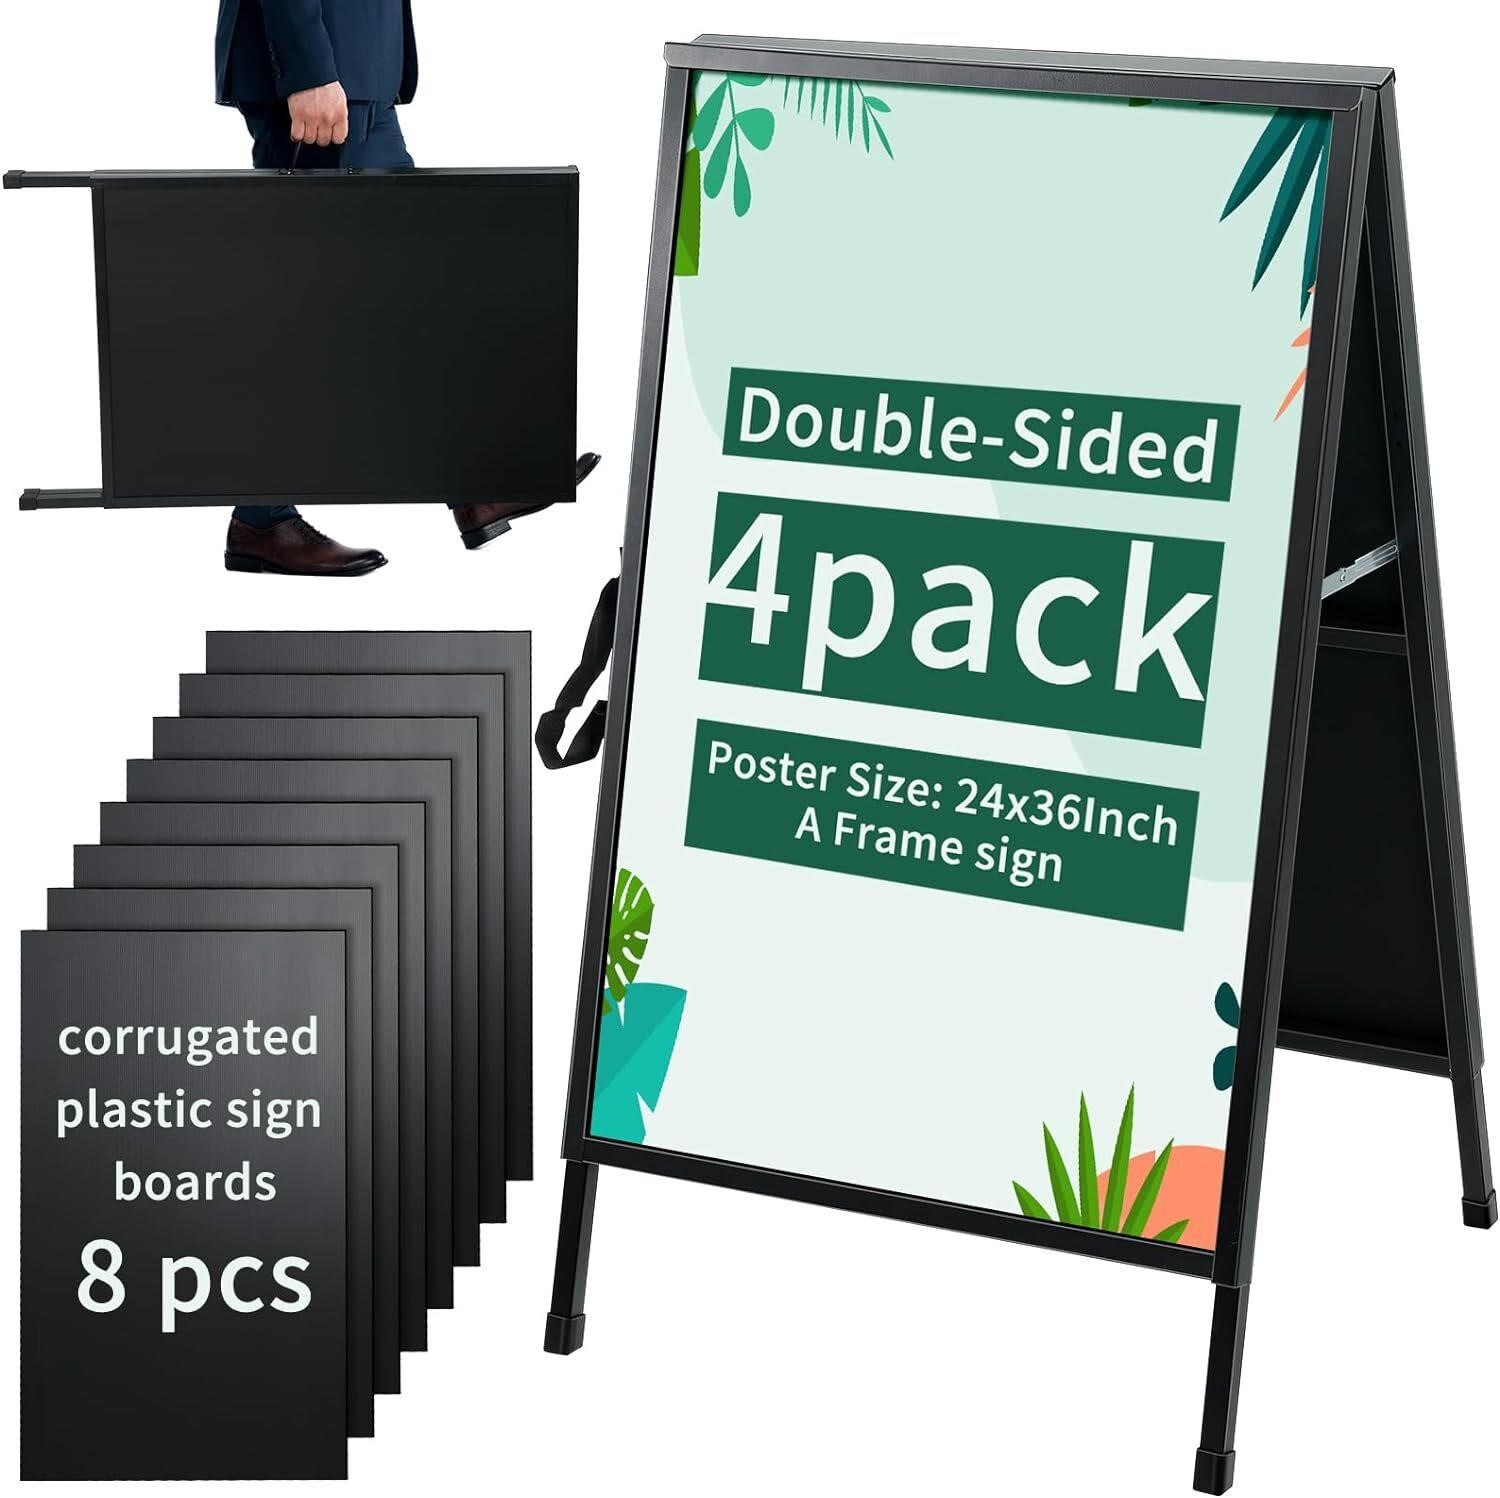 Zonon 4 Pack Heavy Duty A Frame Sign 24x36 inches